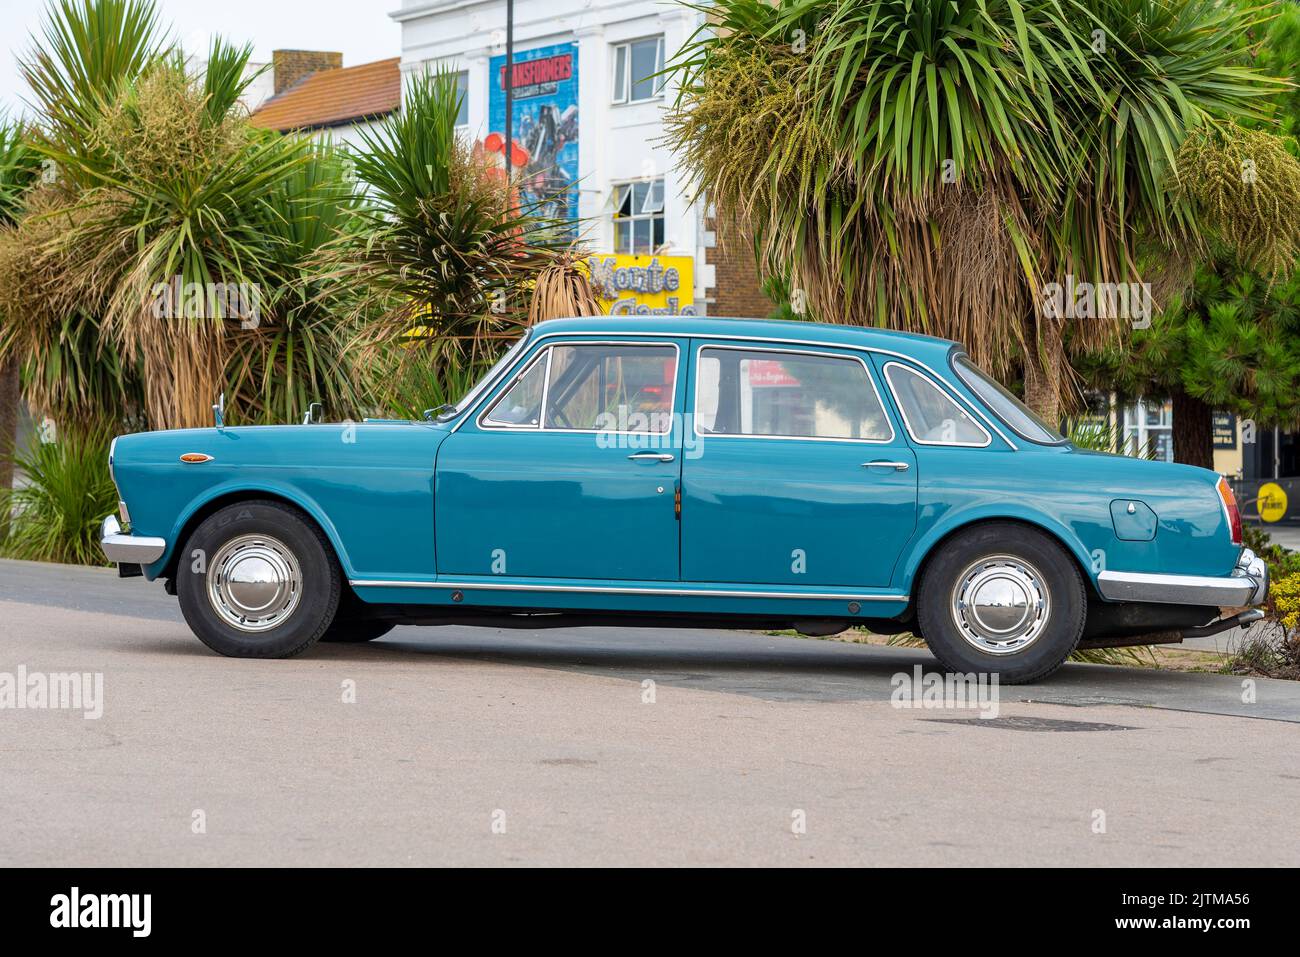 Classic Austin 3 Litre saloon car on show on Marine Parade, Southend on Sea, Essex, UK. 1971 built blue automatic version. Side view Stock Photo